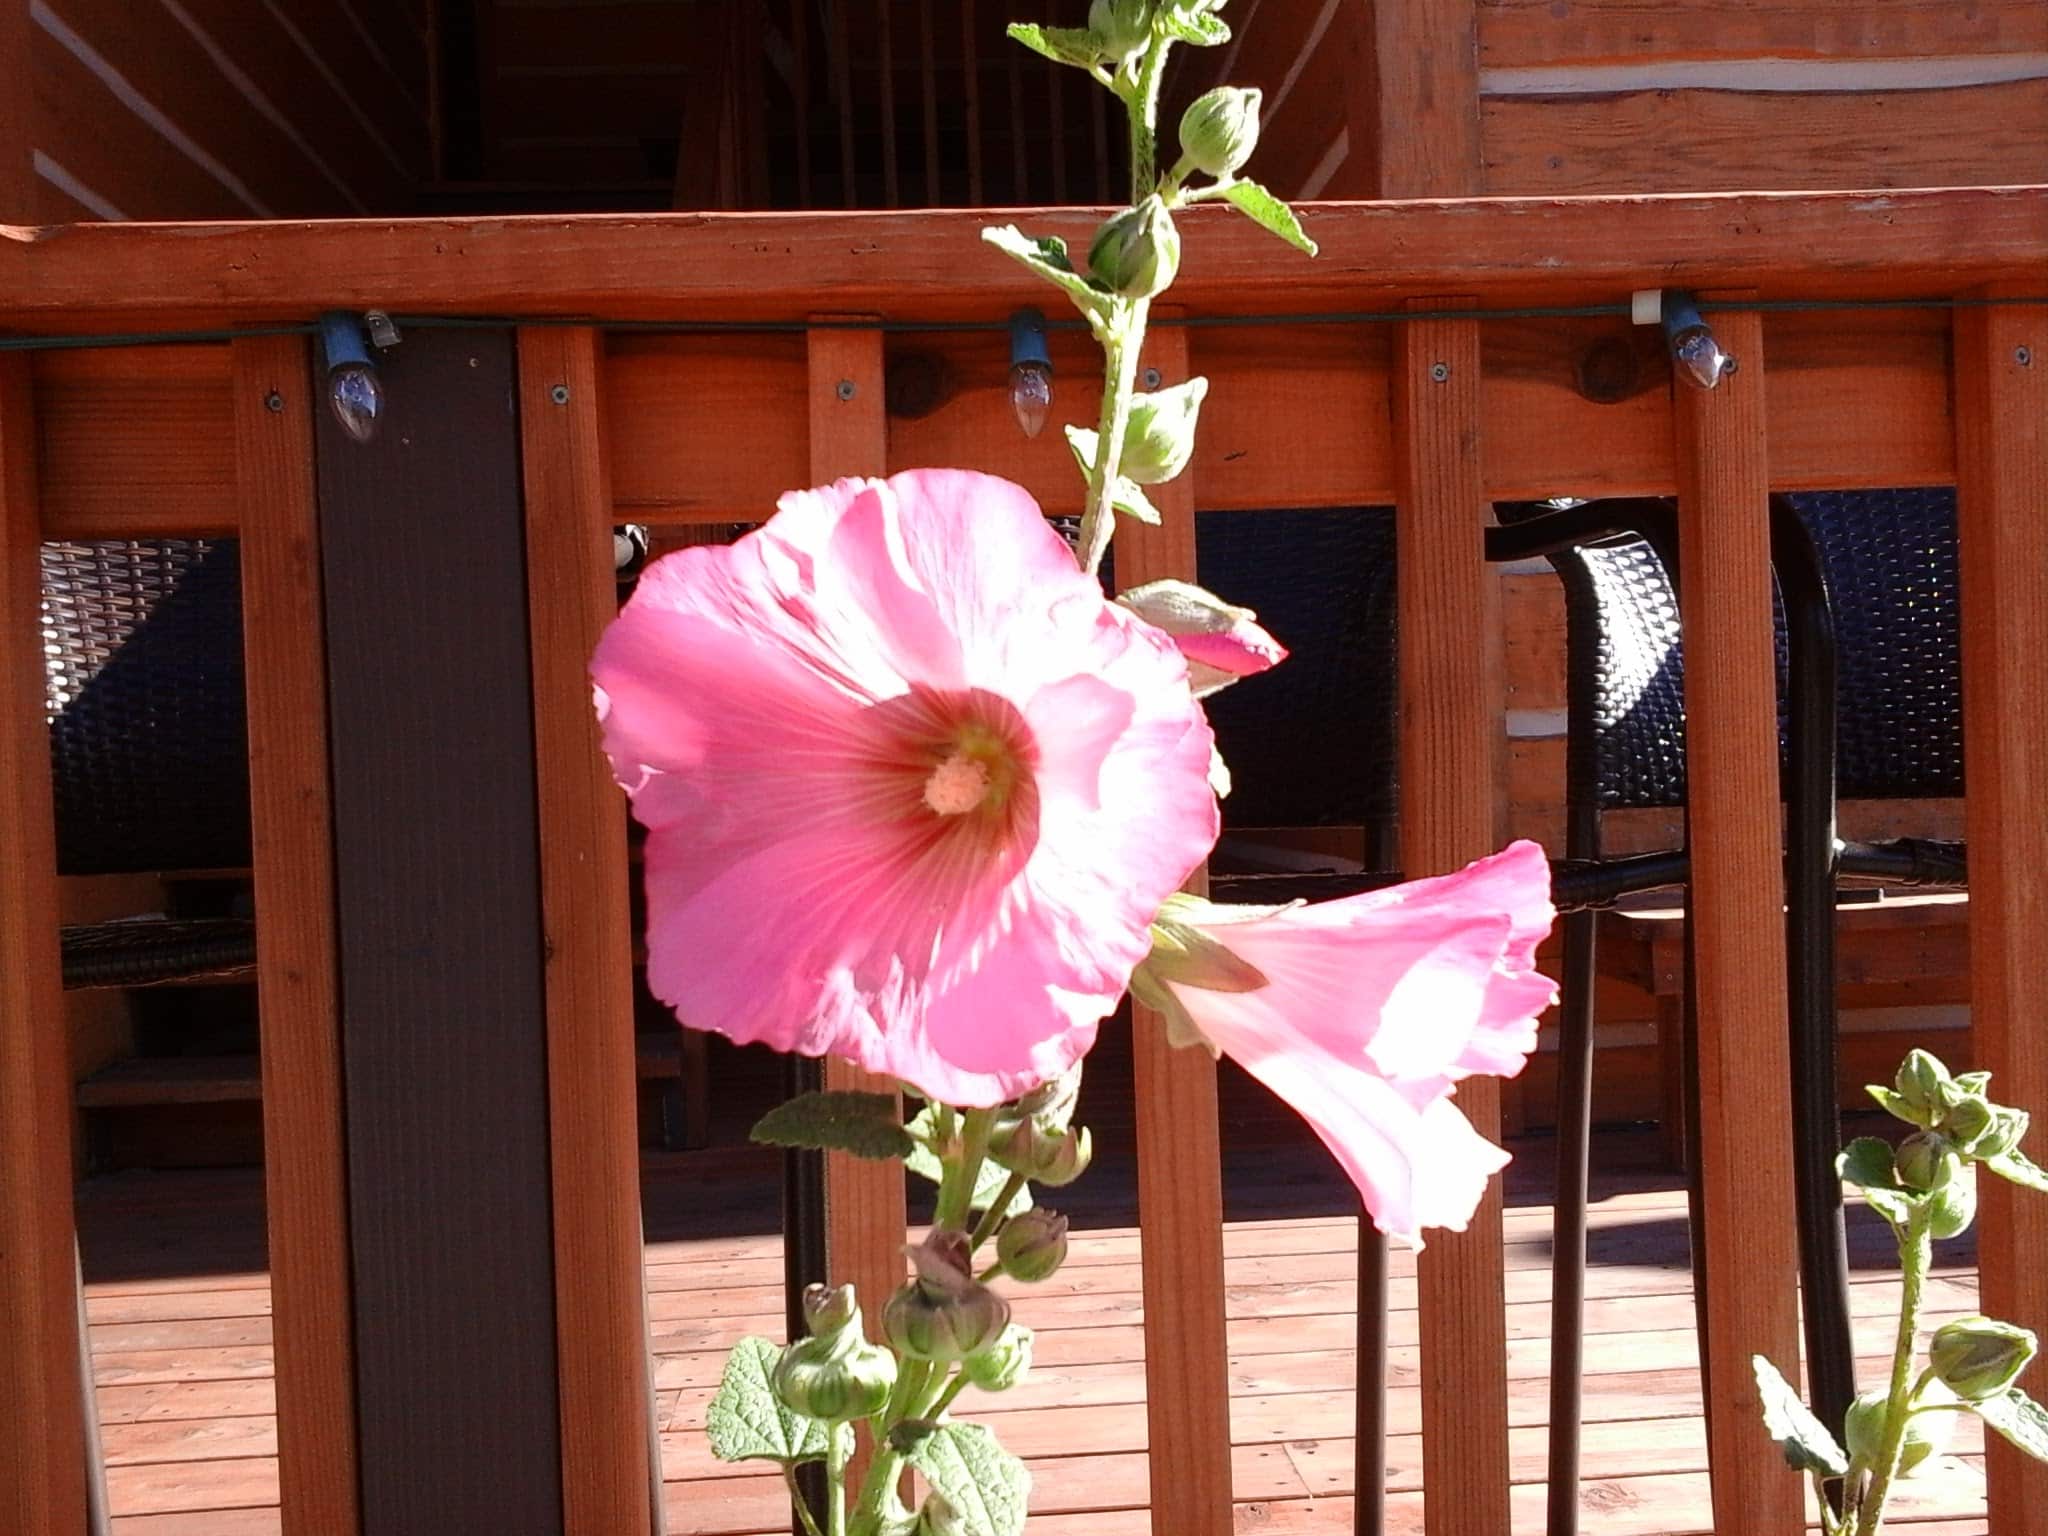 Pink hollyhock growing along the deck railing.